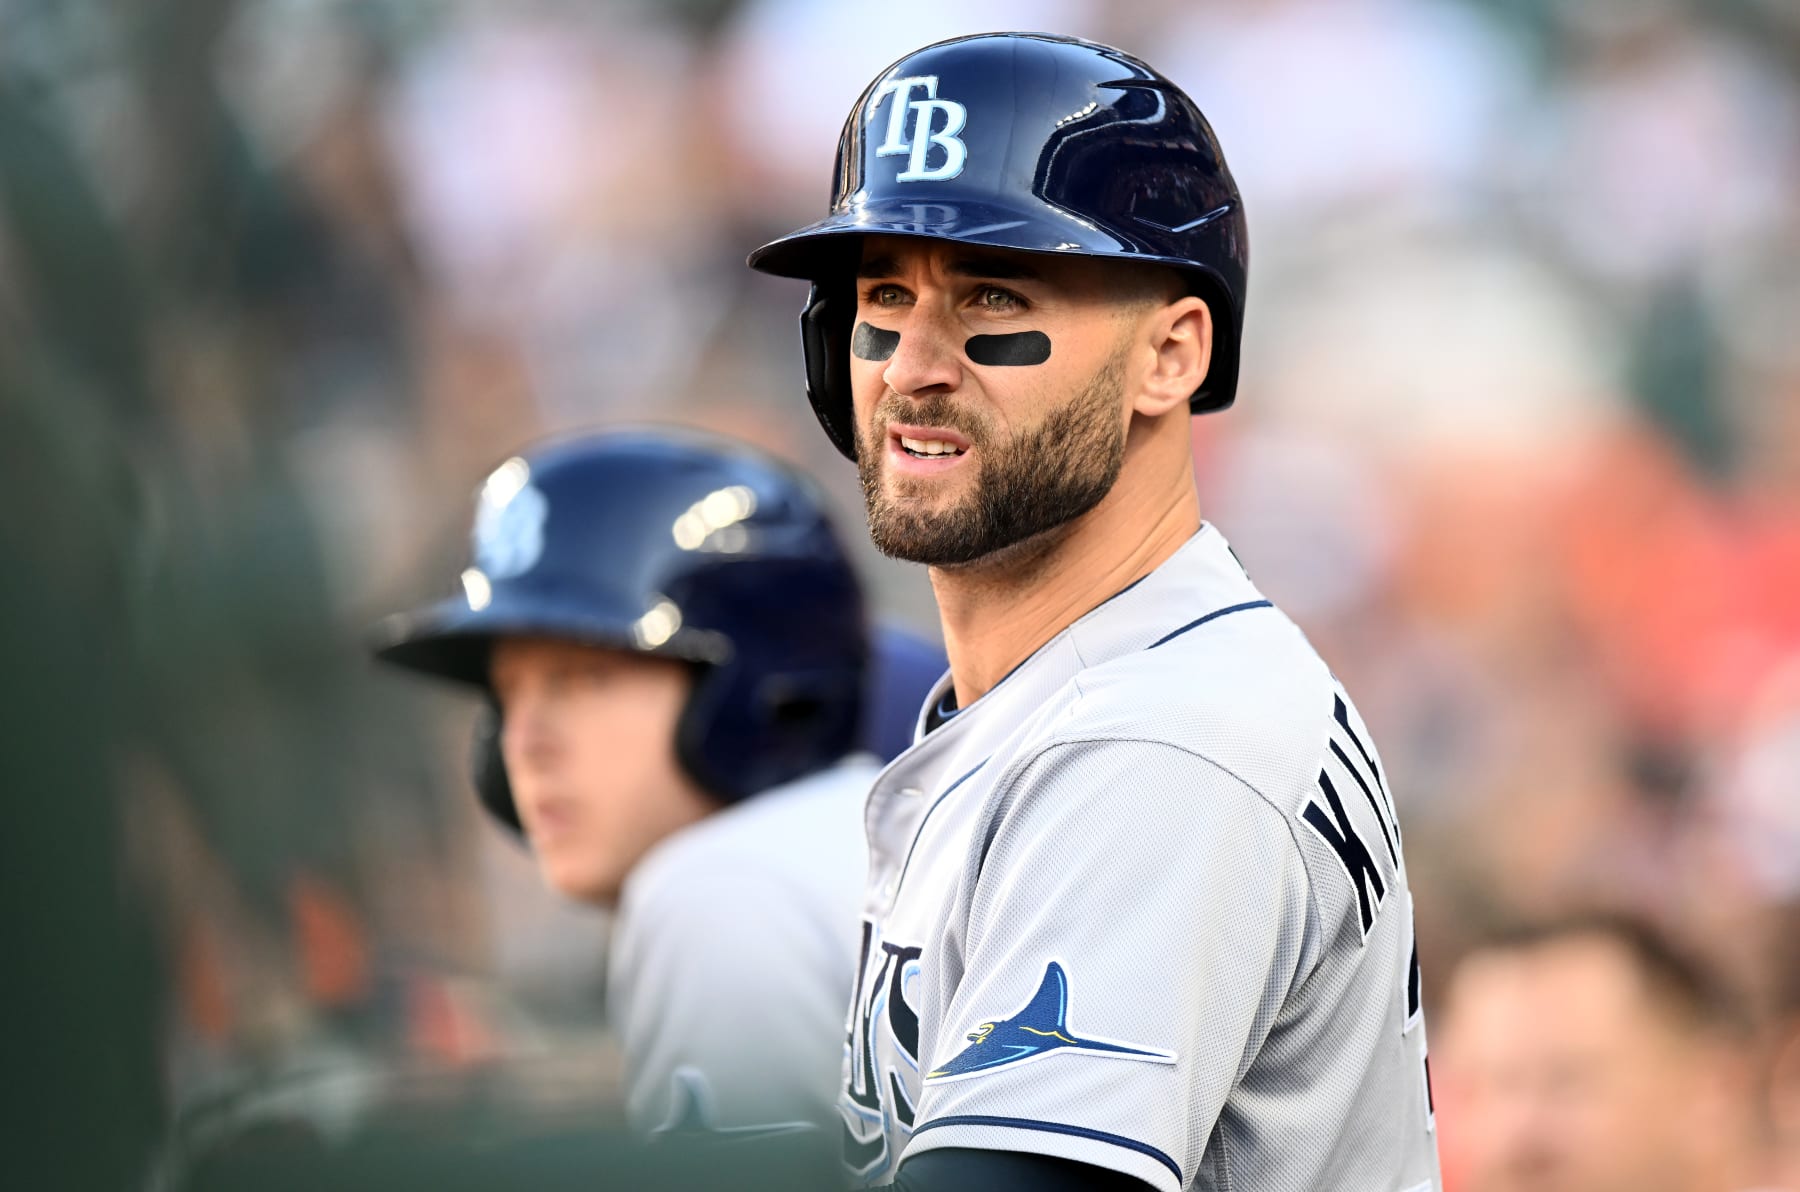 Kevin Kiermaier really doesn't want to leave Rays